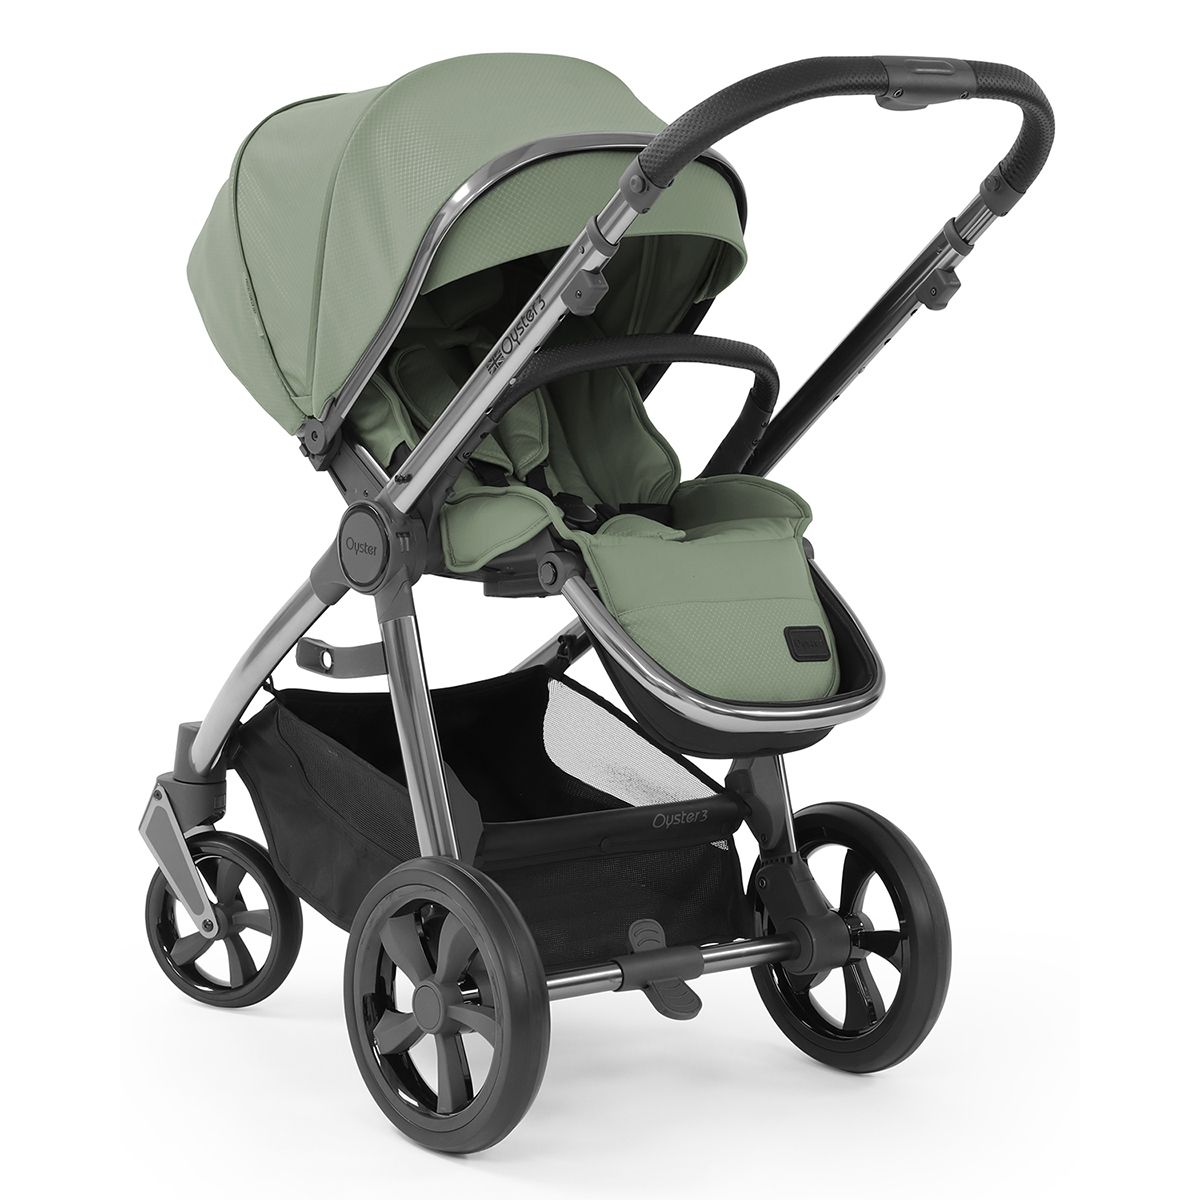 BabyStyle Oyster3 Essential Package Travel System